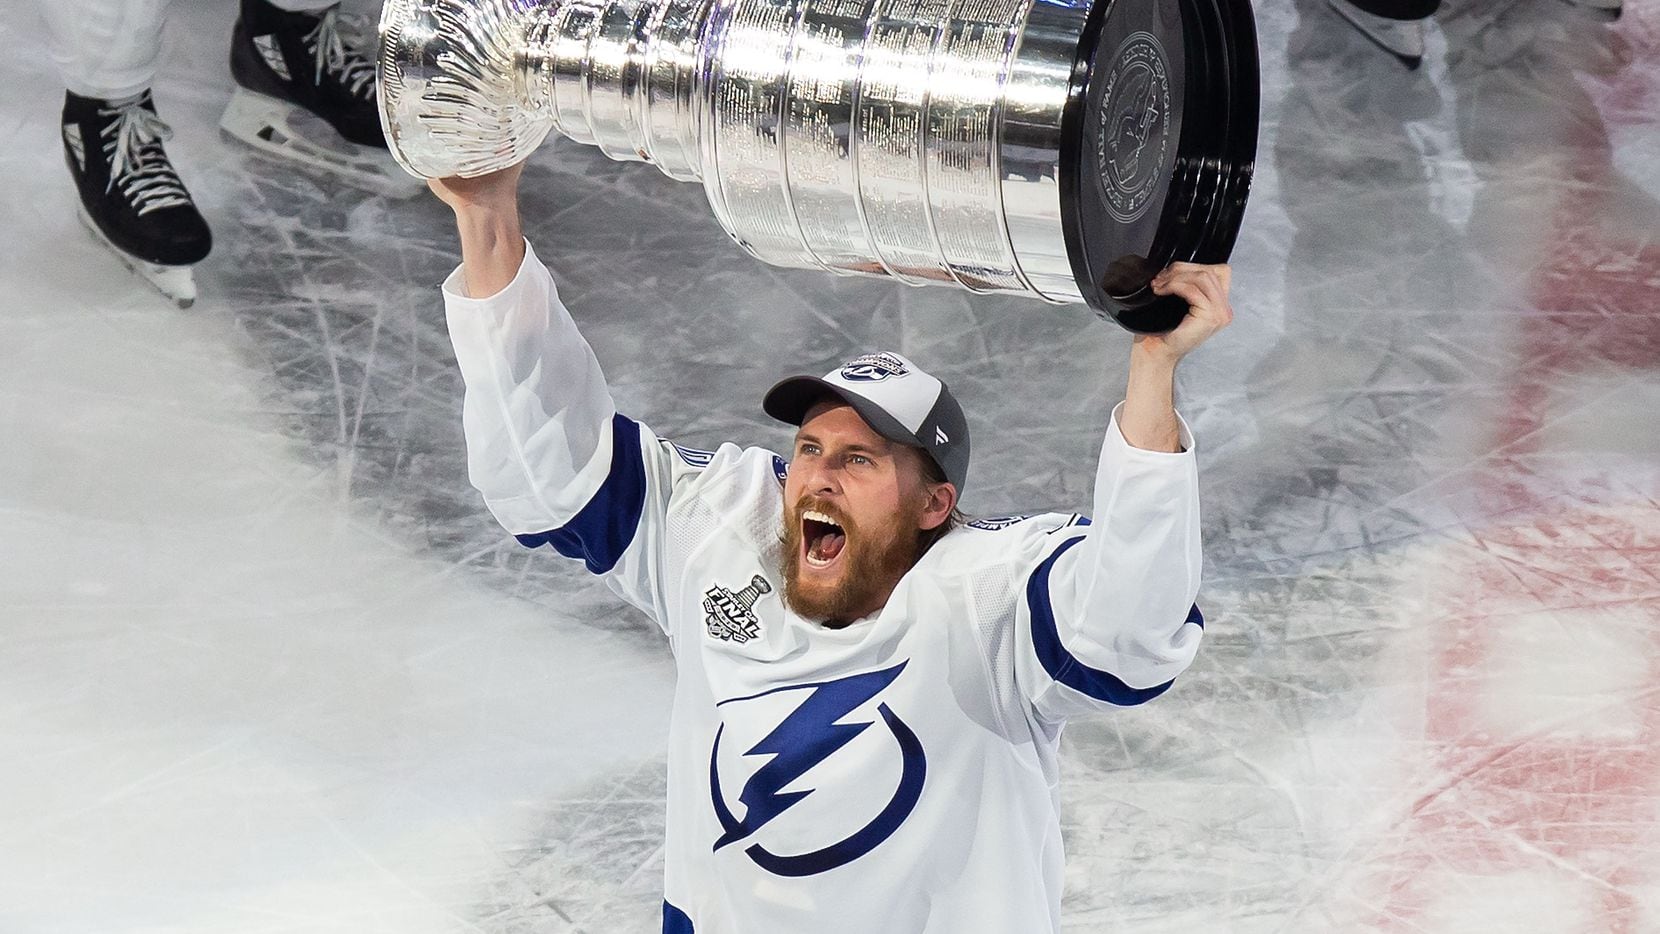 Blake Coleman (20) of the Tampa Bay Lightning hoists the Stanley Cup after defeating the Dallas Stars during Game Six of the Stanley Cup Final at Rogers Place in Edmonton, Alberta, Canada on Monday, September 28, 2020.